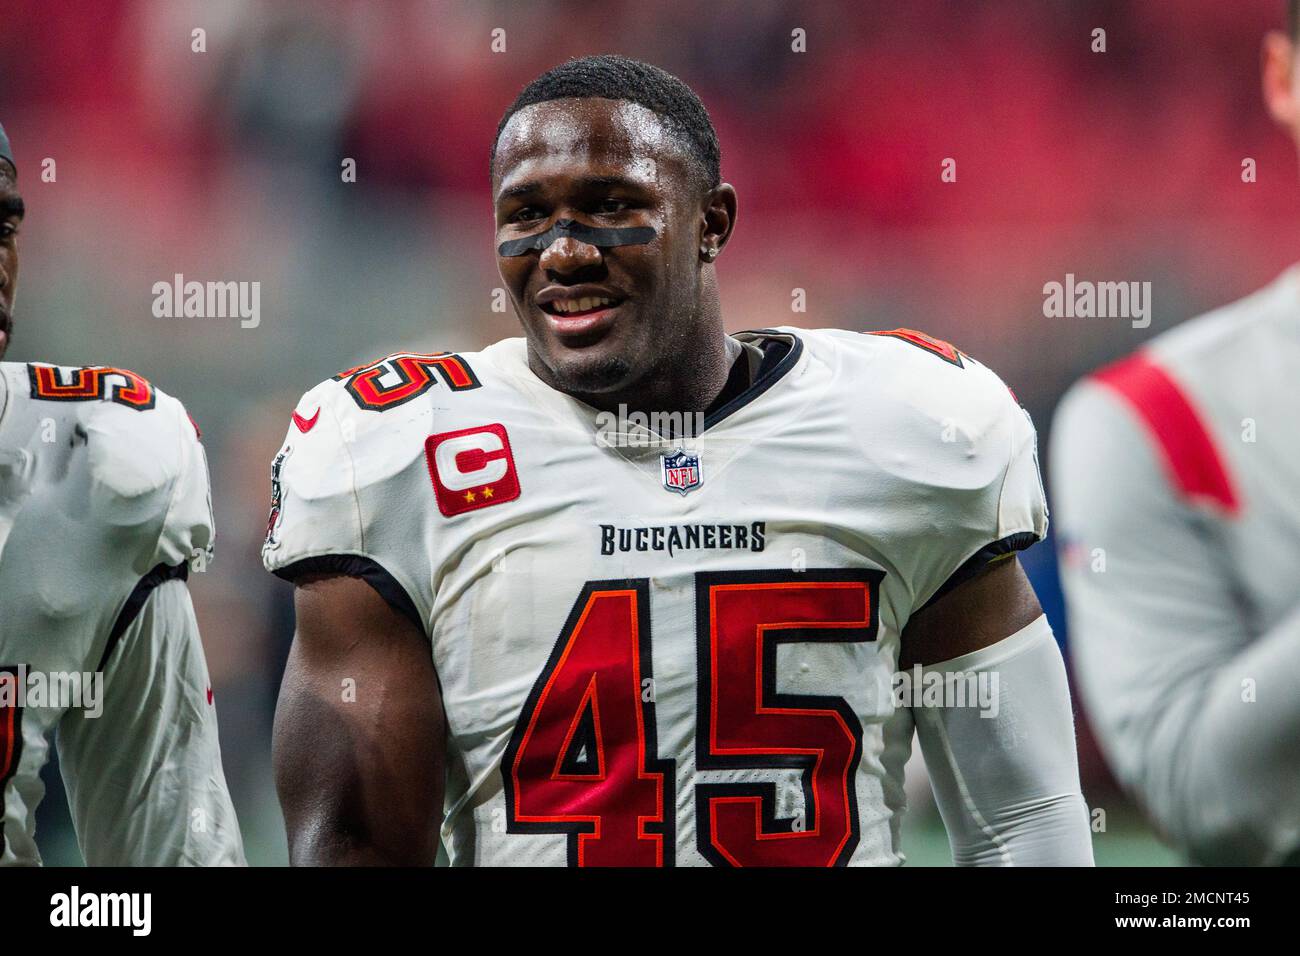 Tampa Bay Buccaneers inside linebacker Devin White (45) walks off the field  after an NFL football game against the Atlanta Falcons, Sunday, Dec. 5,  2021, in Atlanta. The Tampa Bay Buccaneers won